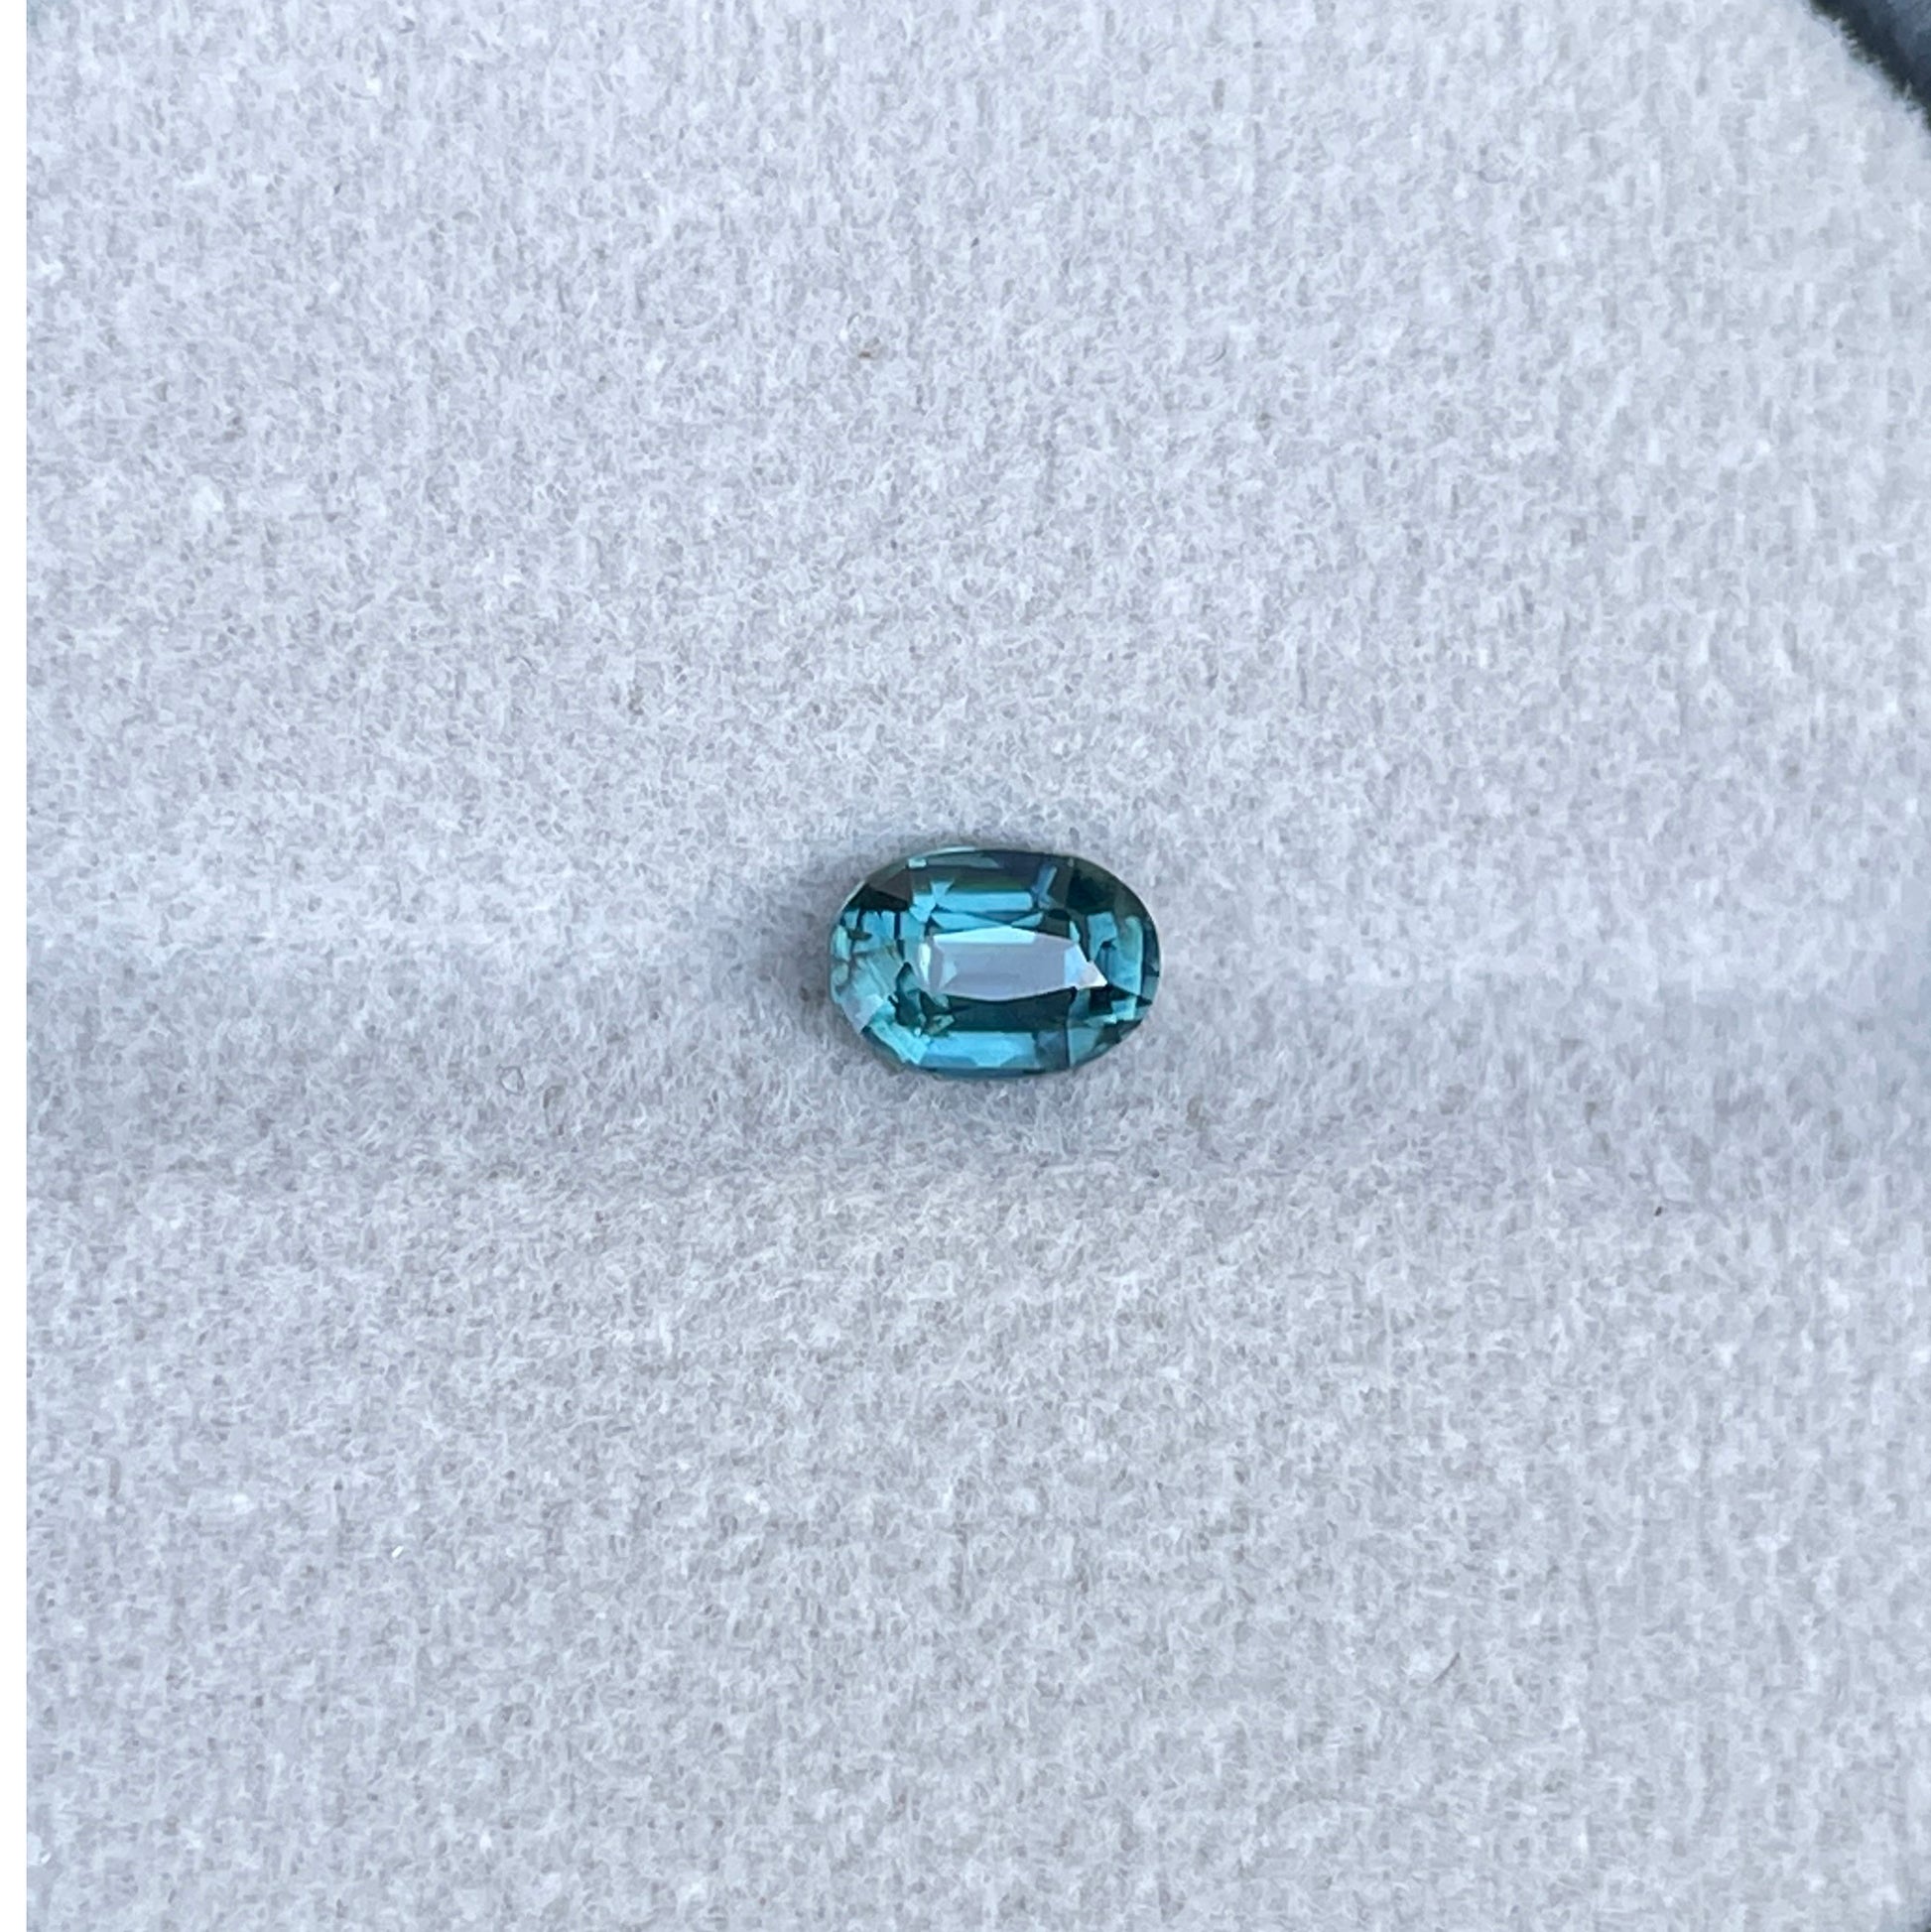 Loose sapphire heated certified blue green oval shape cut natural 0.73 ct